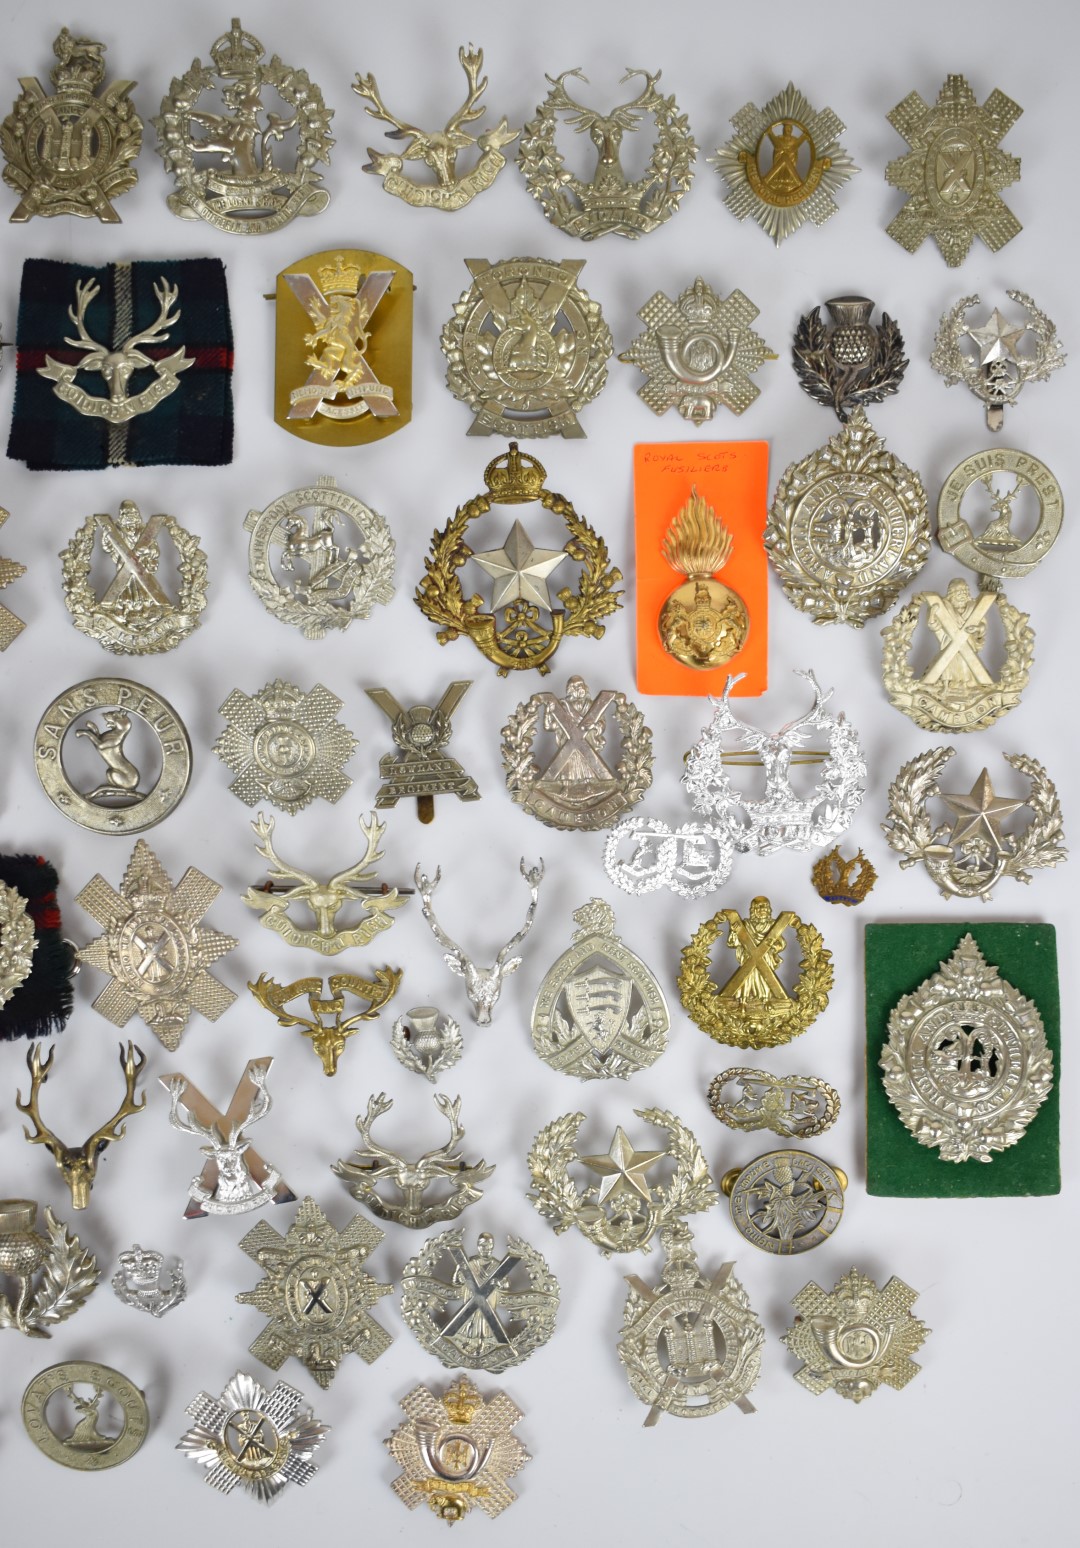 Collection of approximately 60 British Army Scottish Regiment badges including Royal Scots Guards, - Image 6 of 6